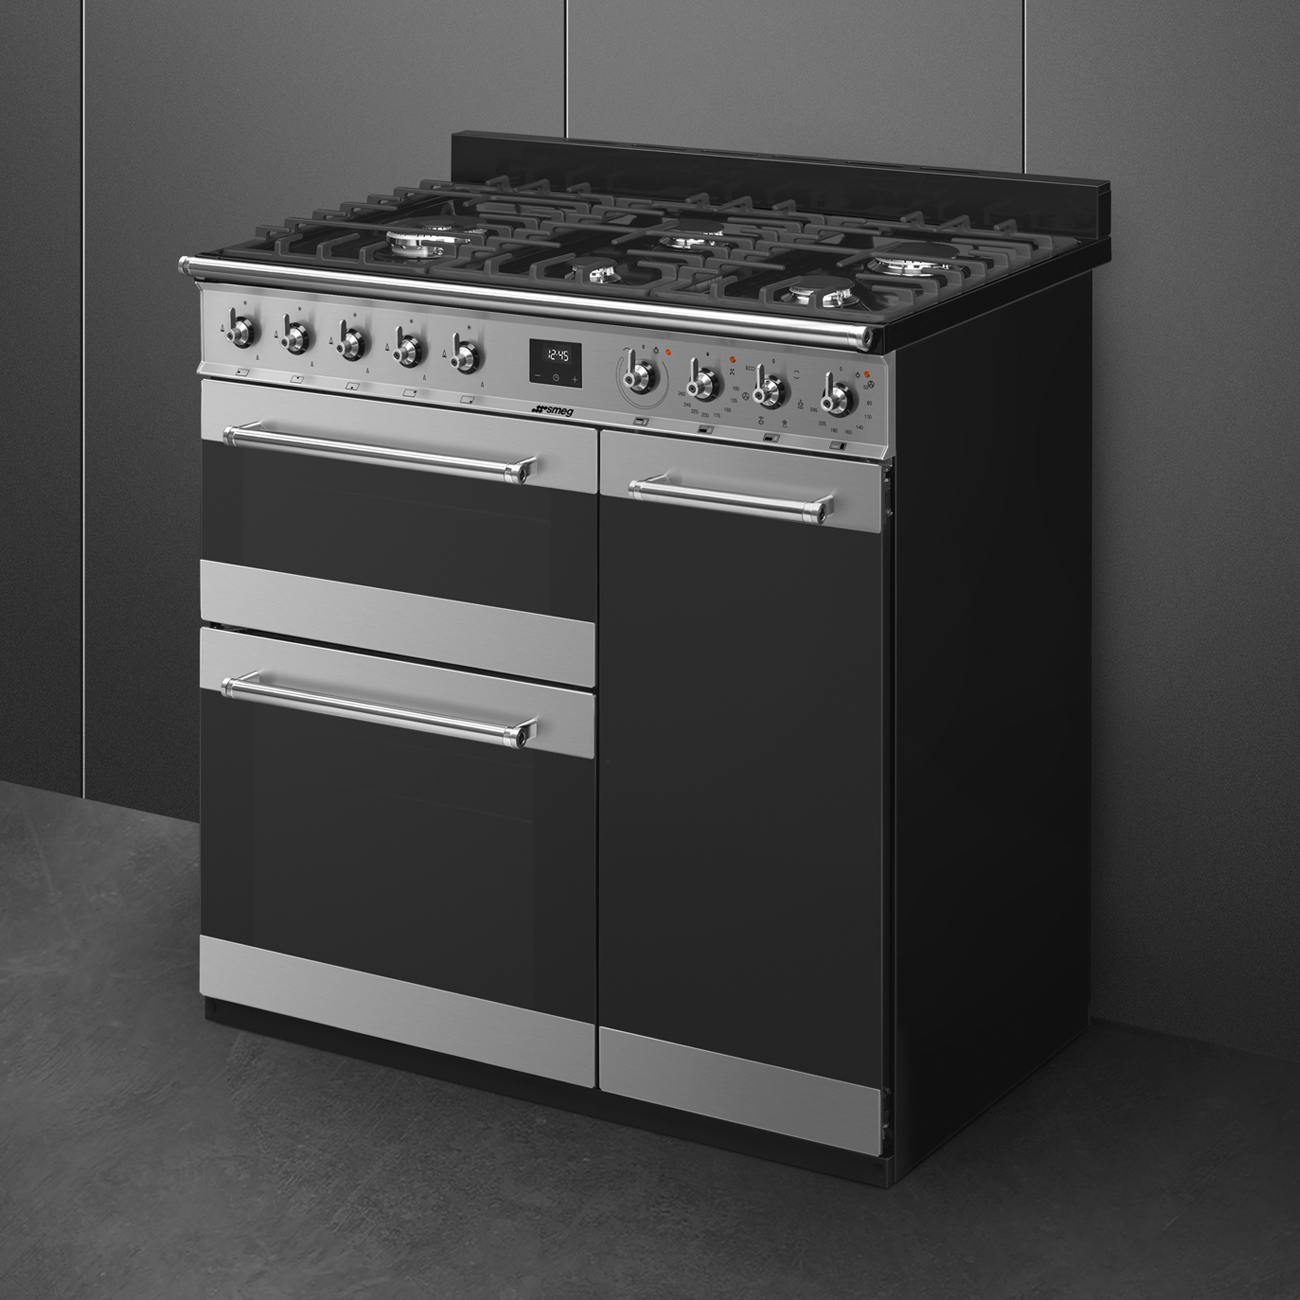 Smeg Stainless steel Cooker with Gas Hob_3